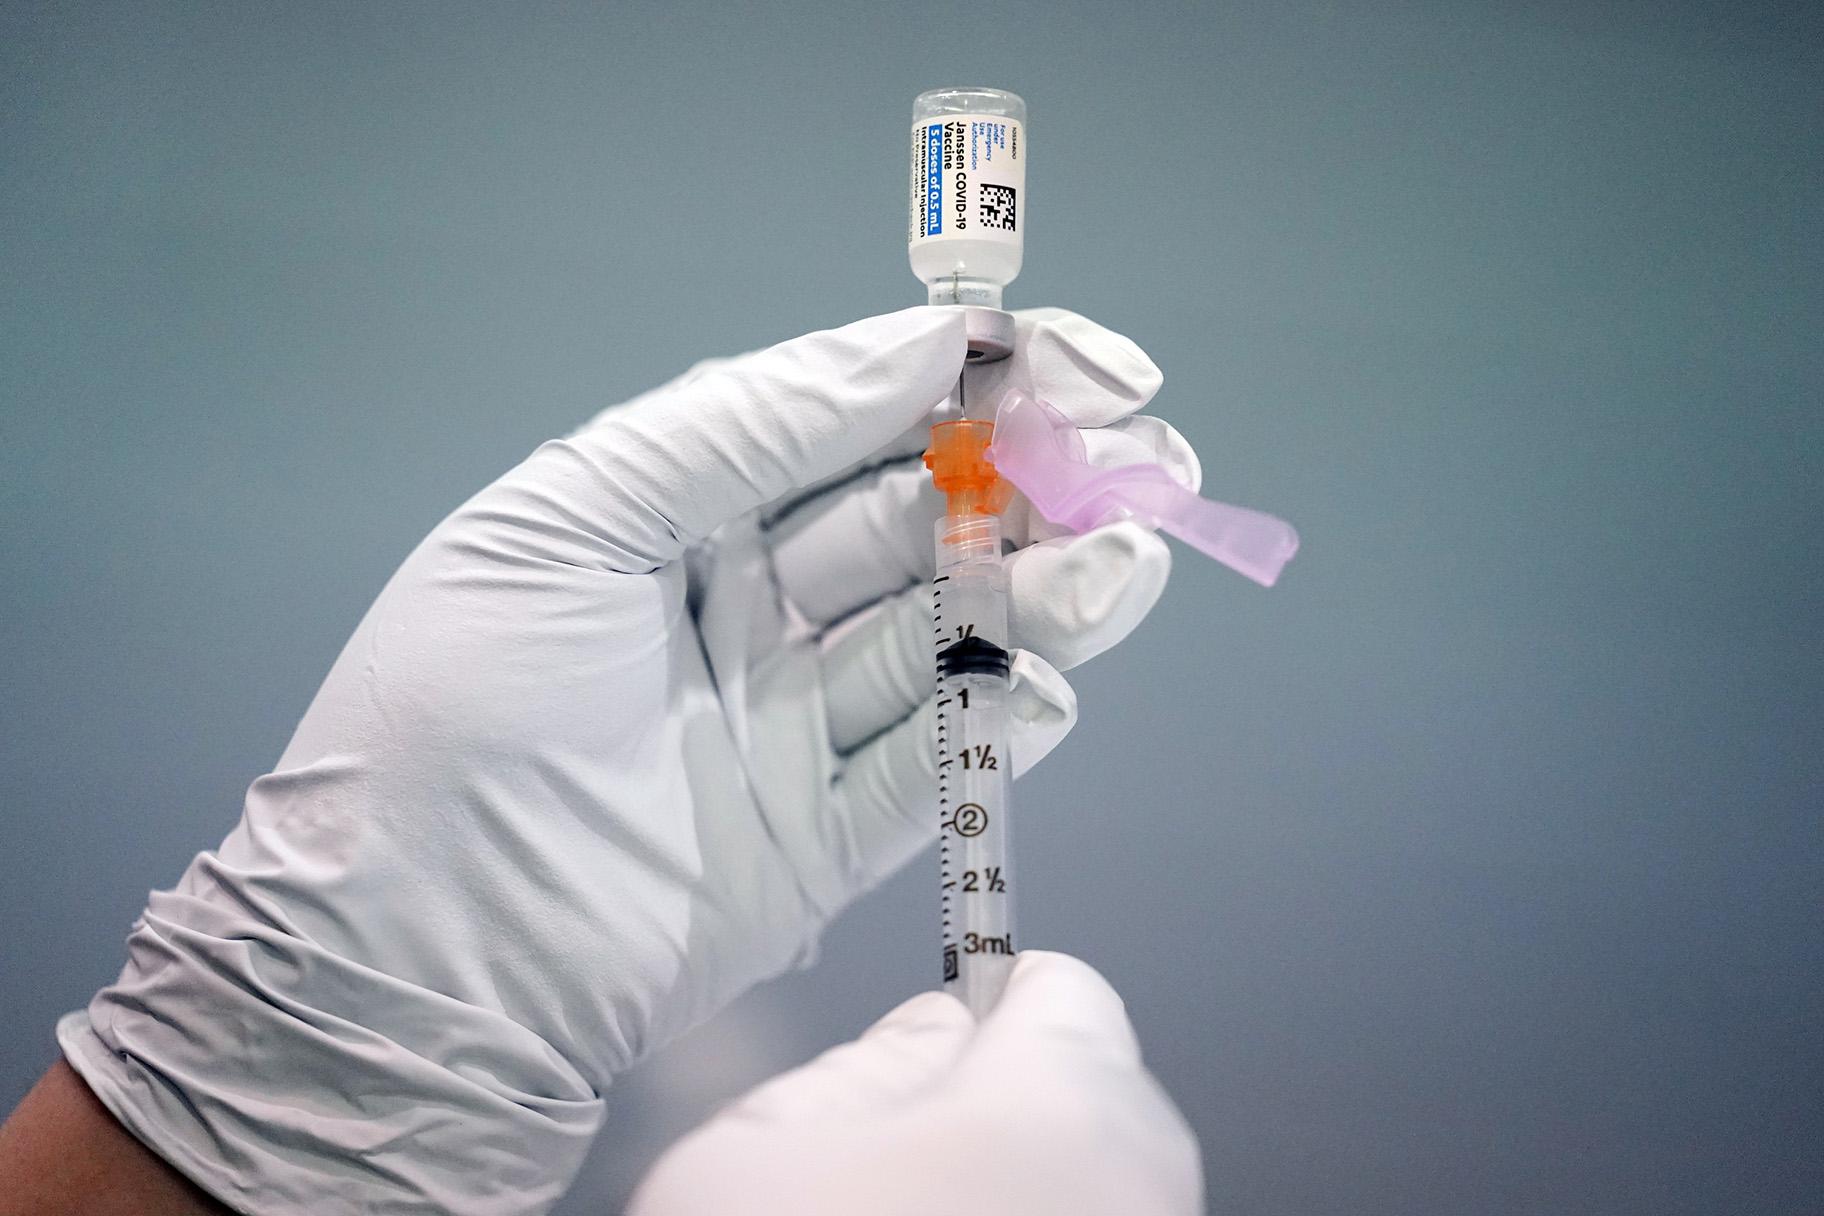 In this March 26, 2021, file photo a member of the Philadelphia Fire Department prepares a dose of the Johnson & Johnson COVID-19 vaccine at a vaccination site setup in Philadelphia. (AP Photo / Matt Rourke, File)